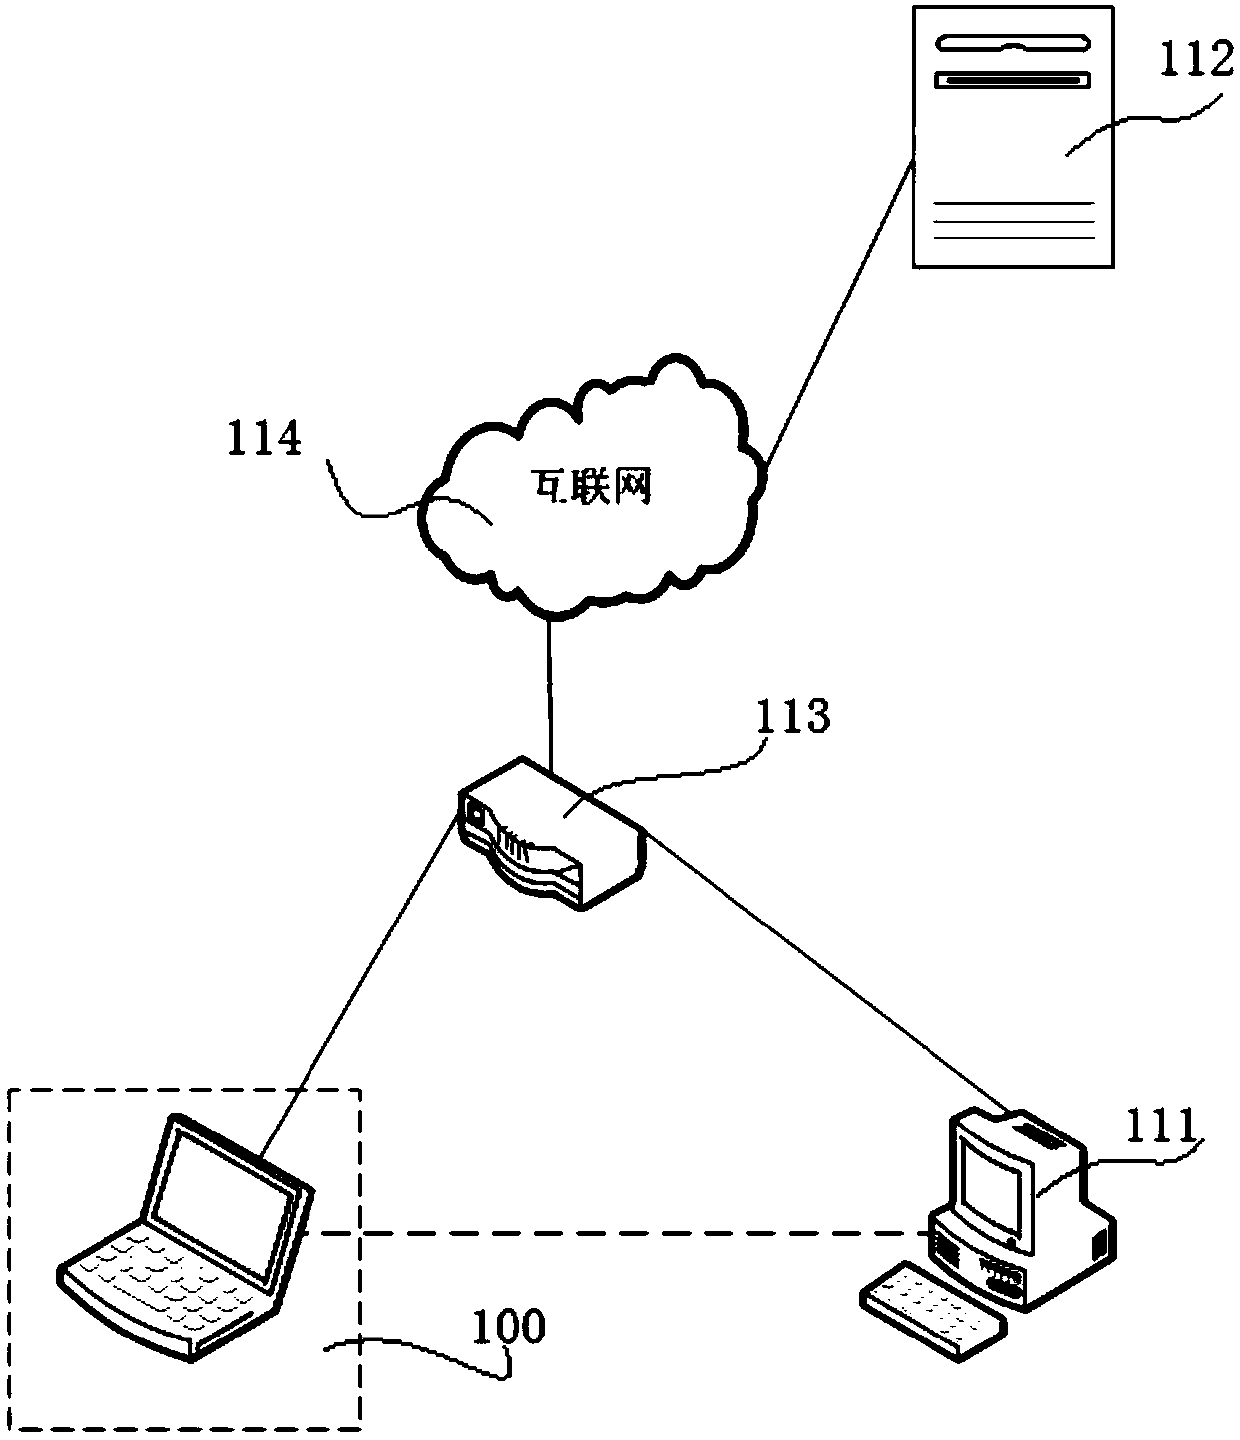 Honeypot server communication method, SSLStrip man-in-the-middle attack perception method and related devices